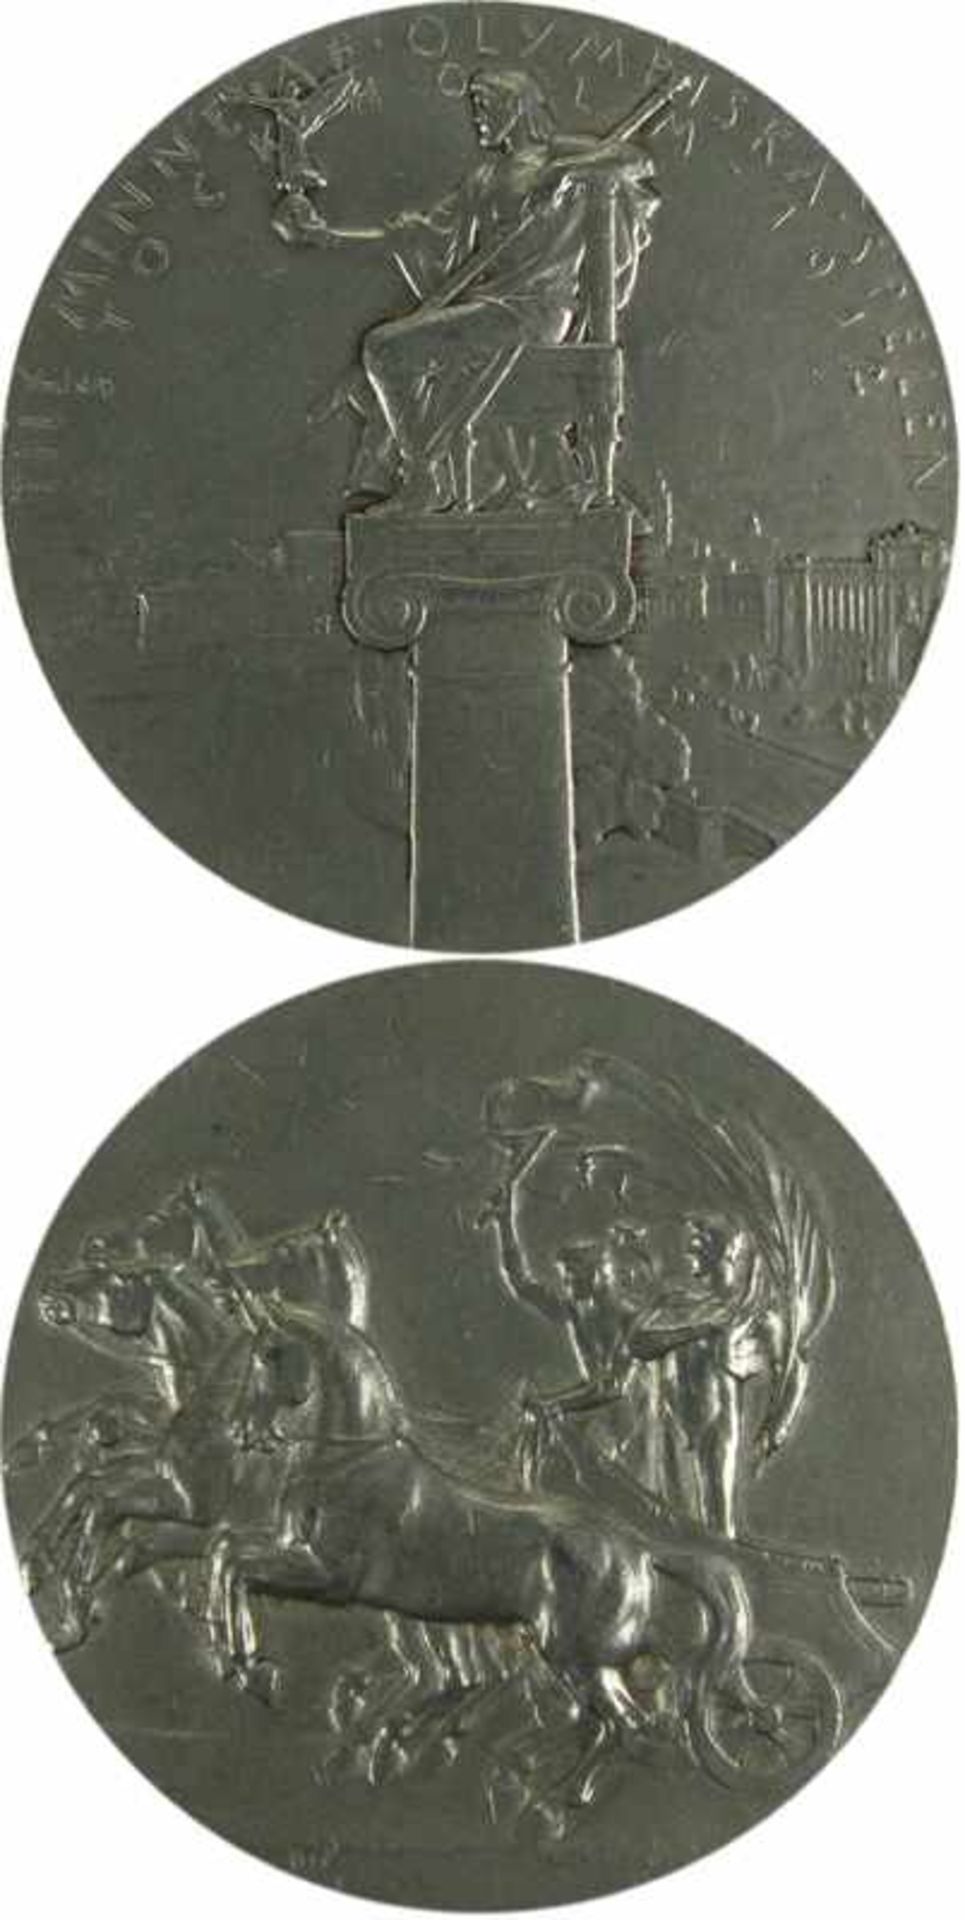 Participation Medal: Olympic Games 1912. - Official Medal for athlets. Size 5.1 cm, pewter.